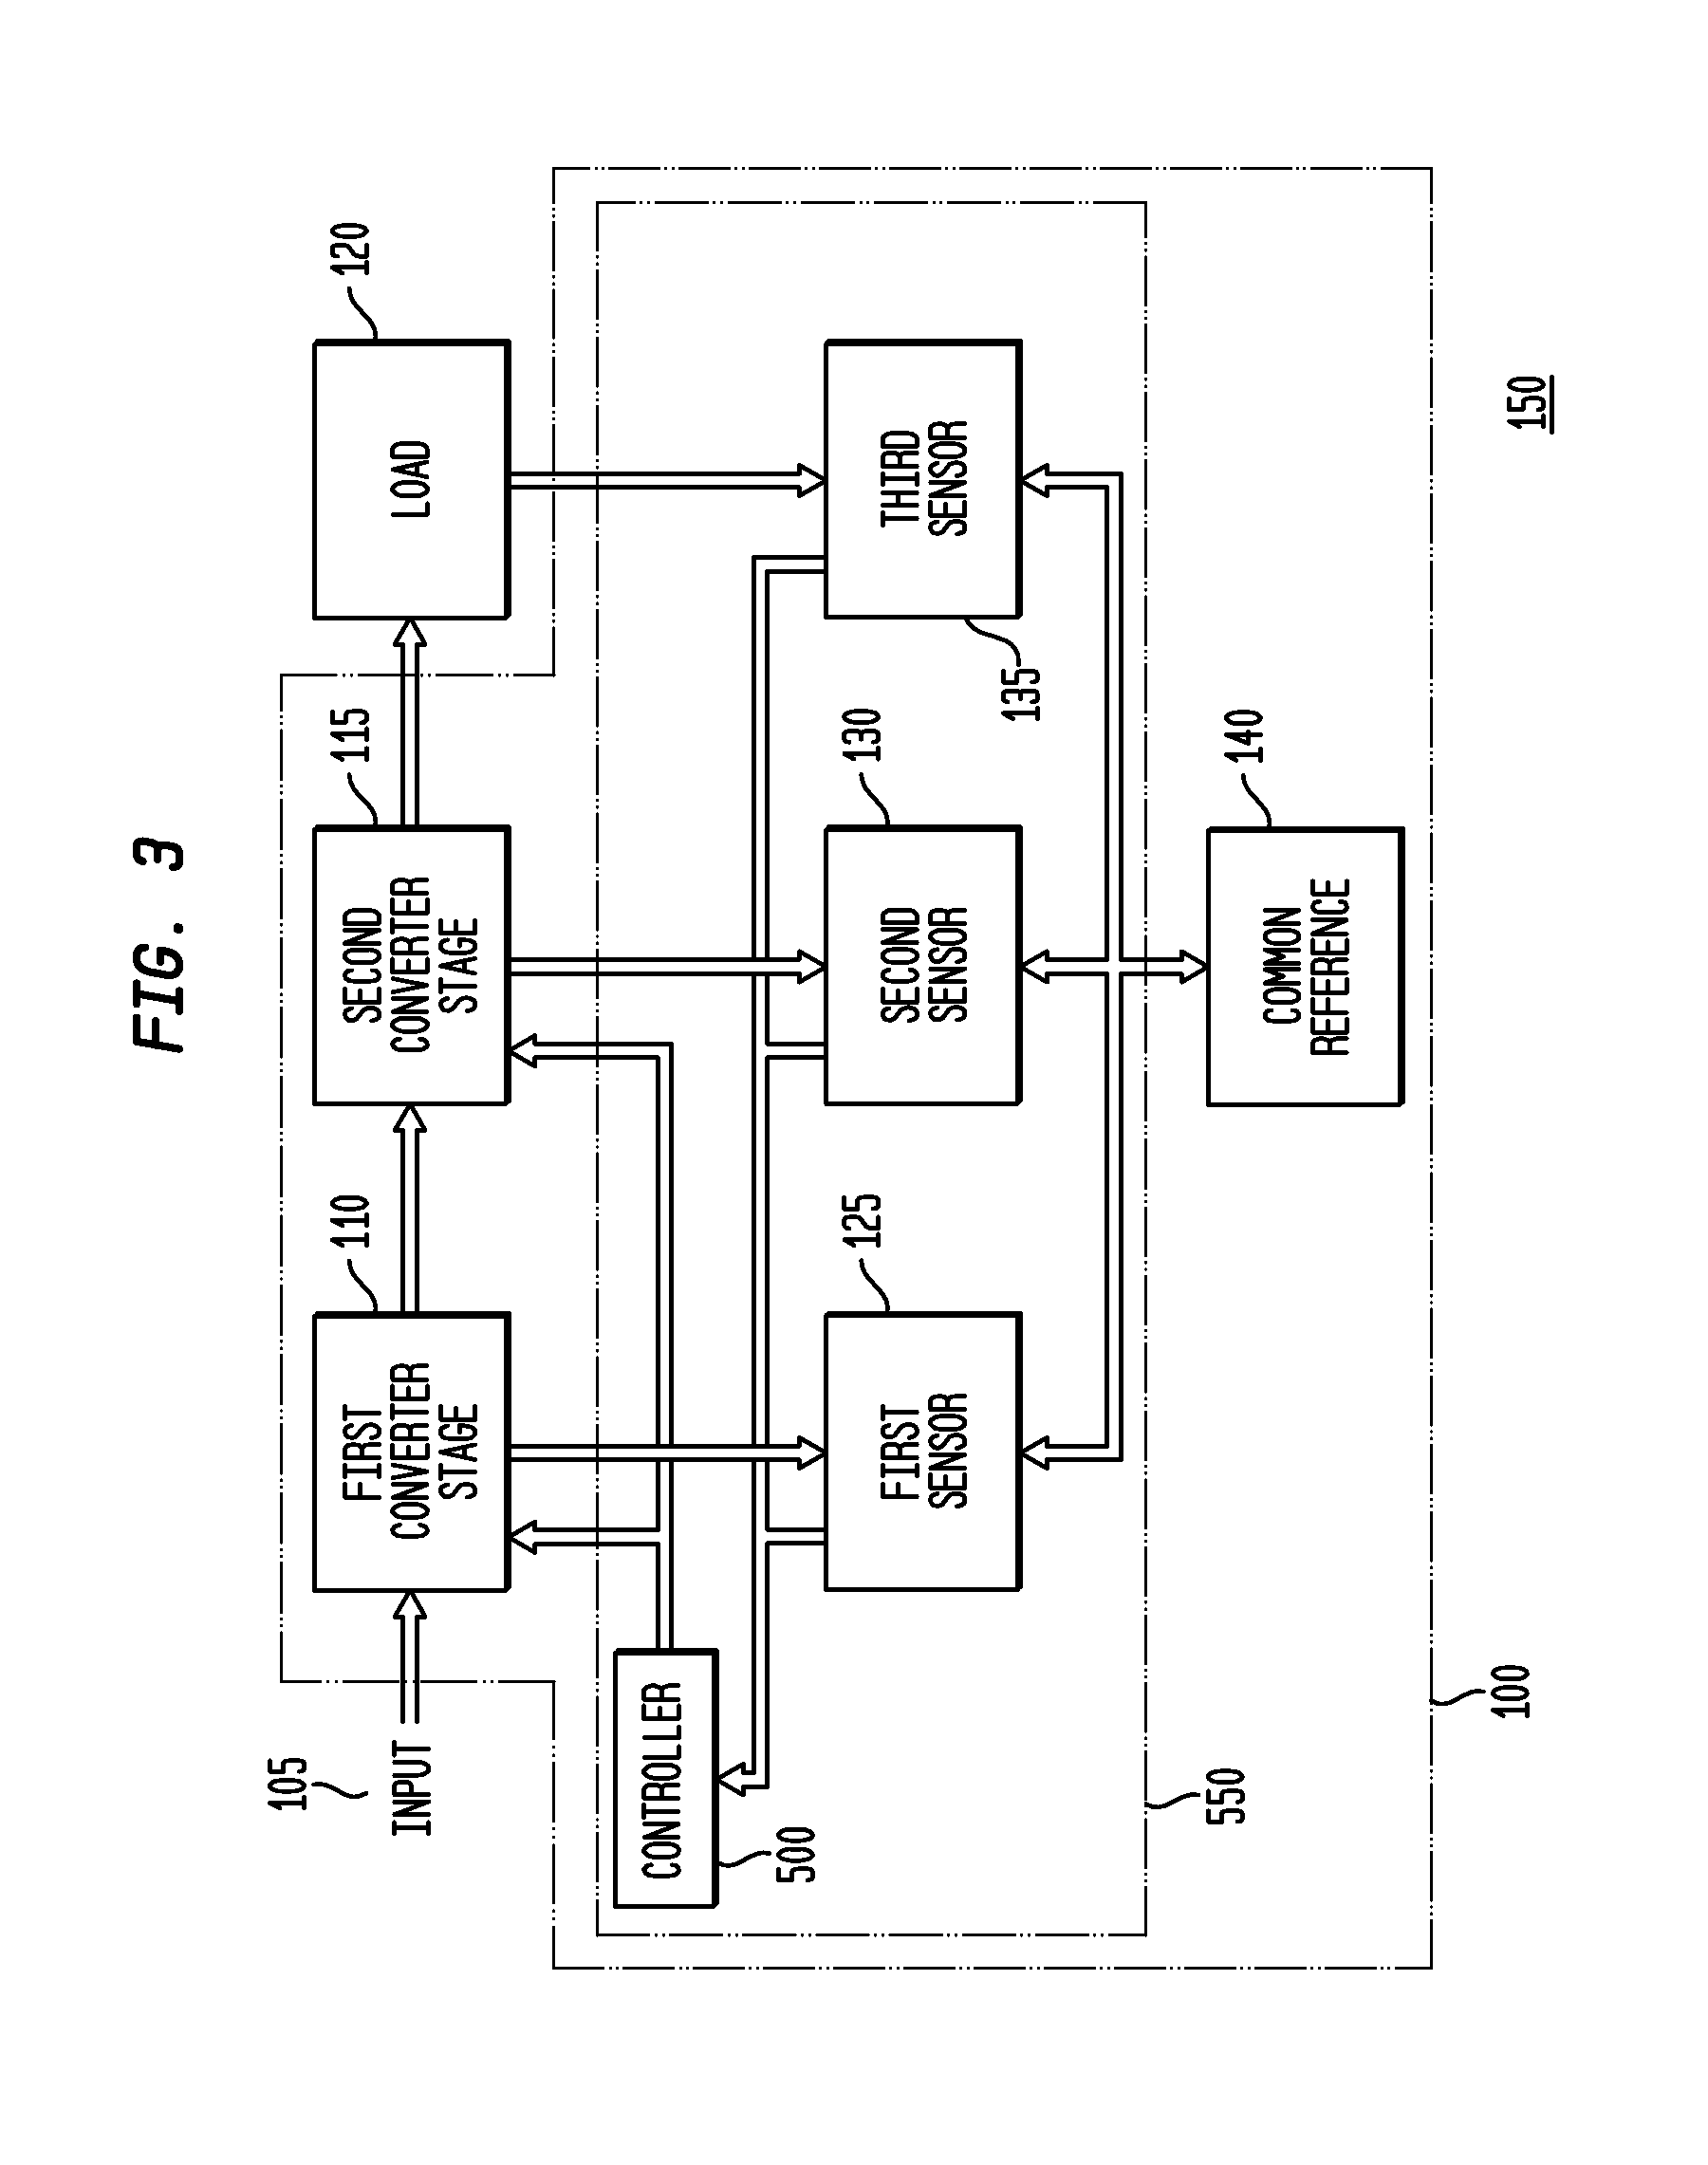 Apparatus, System and Method for Cascaded Power Conversion